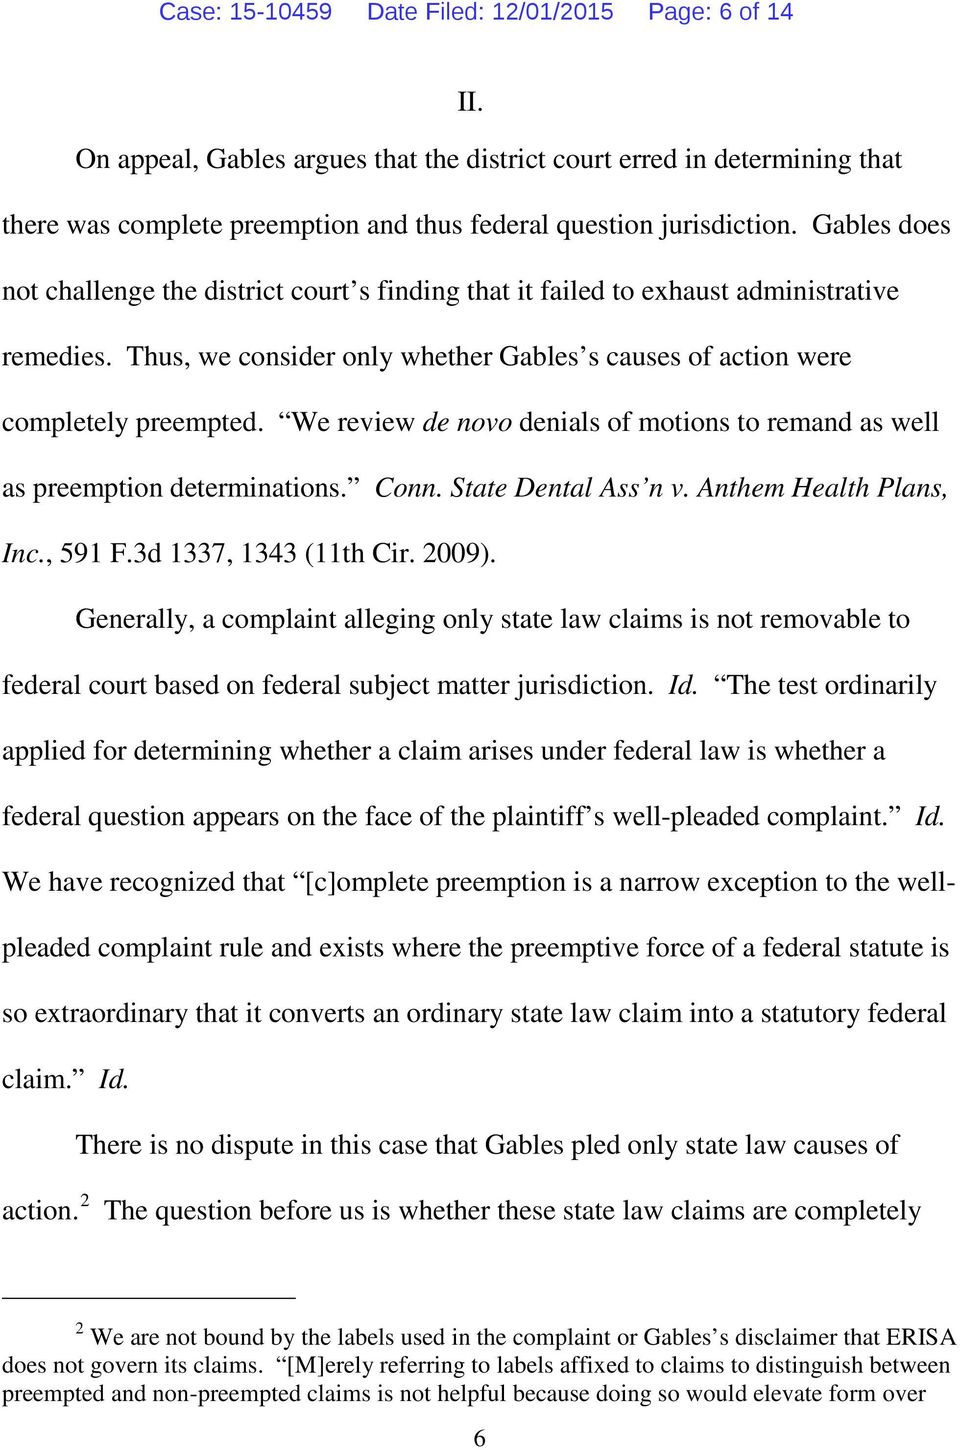 We review de novo denials of motions to remand as well as preemption determinations. Conn. State Dental Ass n v. Anthem Health Plans, Inc., 591 F.3d 1337, 1343 (11th Cir. 2009).